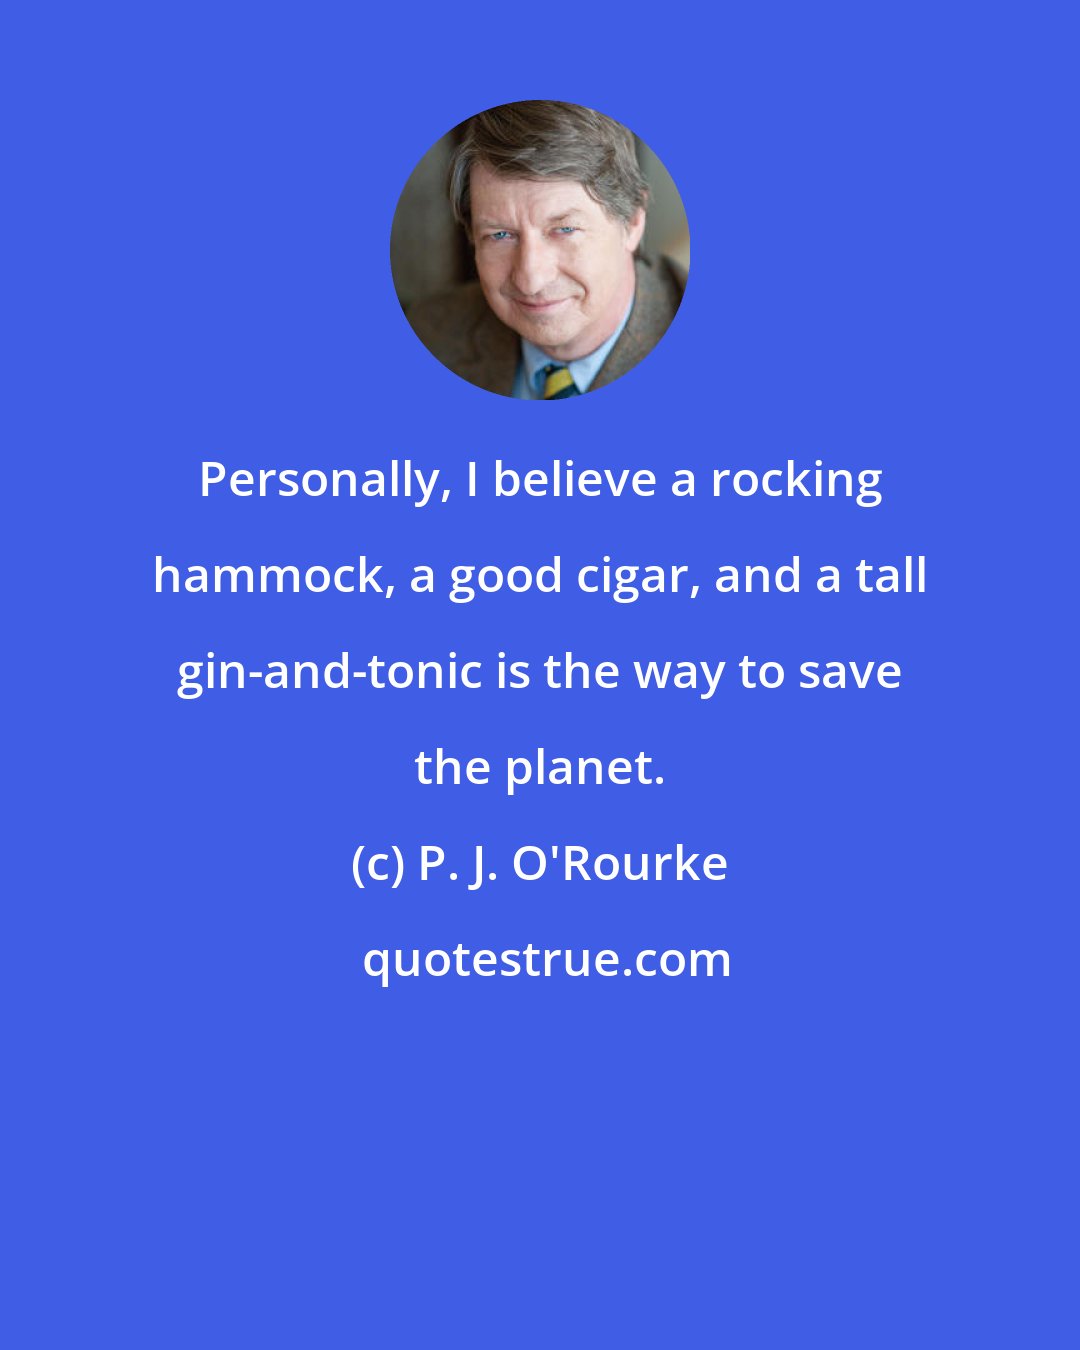 P. J. O'Rourke: Personally, I believe a rocking hammock, a good cigar, and a tall gin-and-tonic is the way to save the planet.